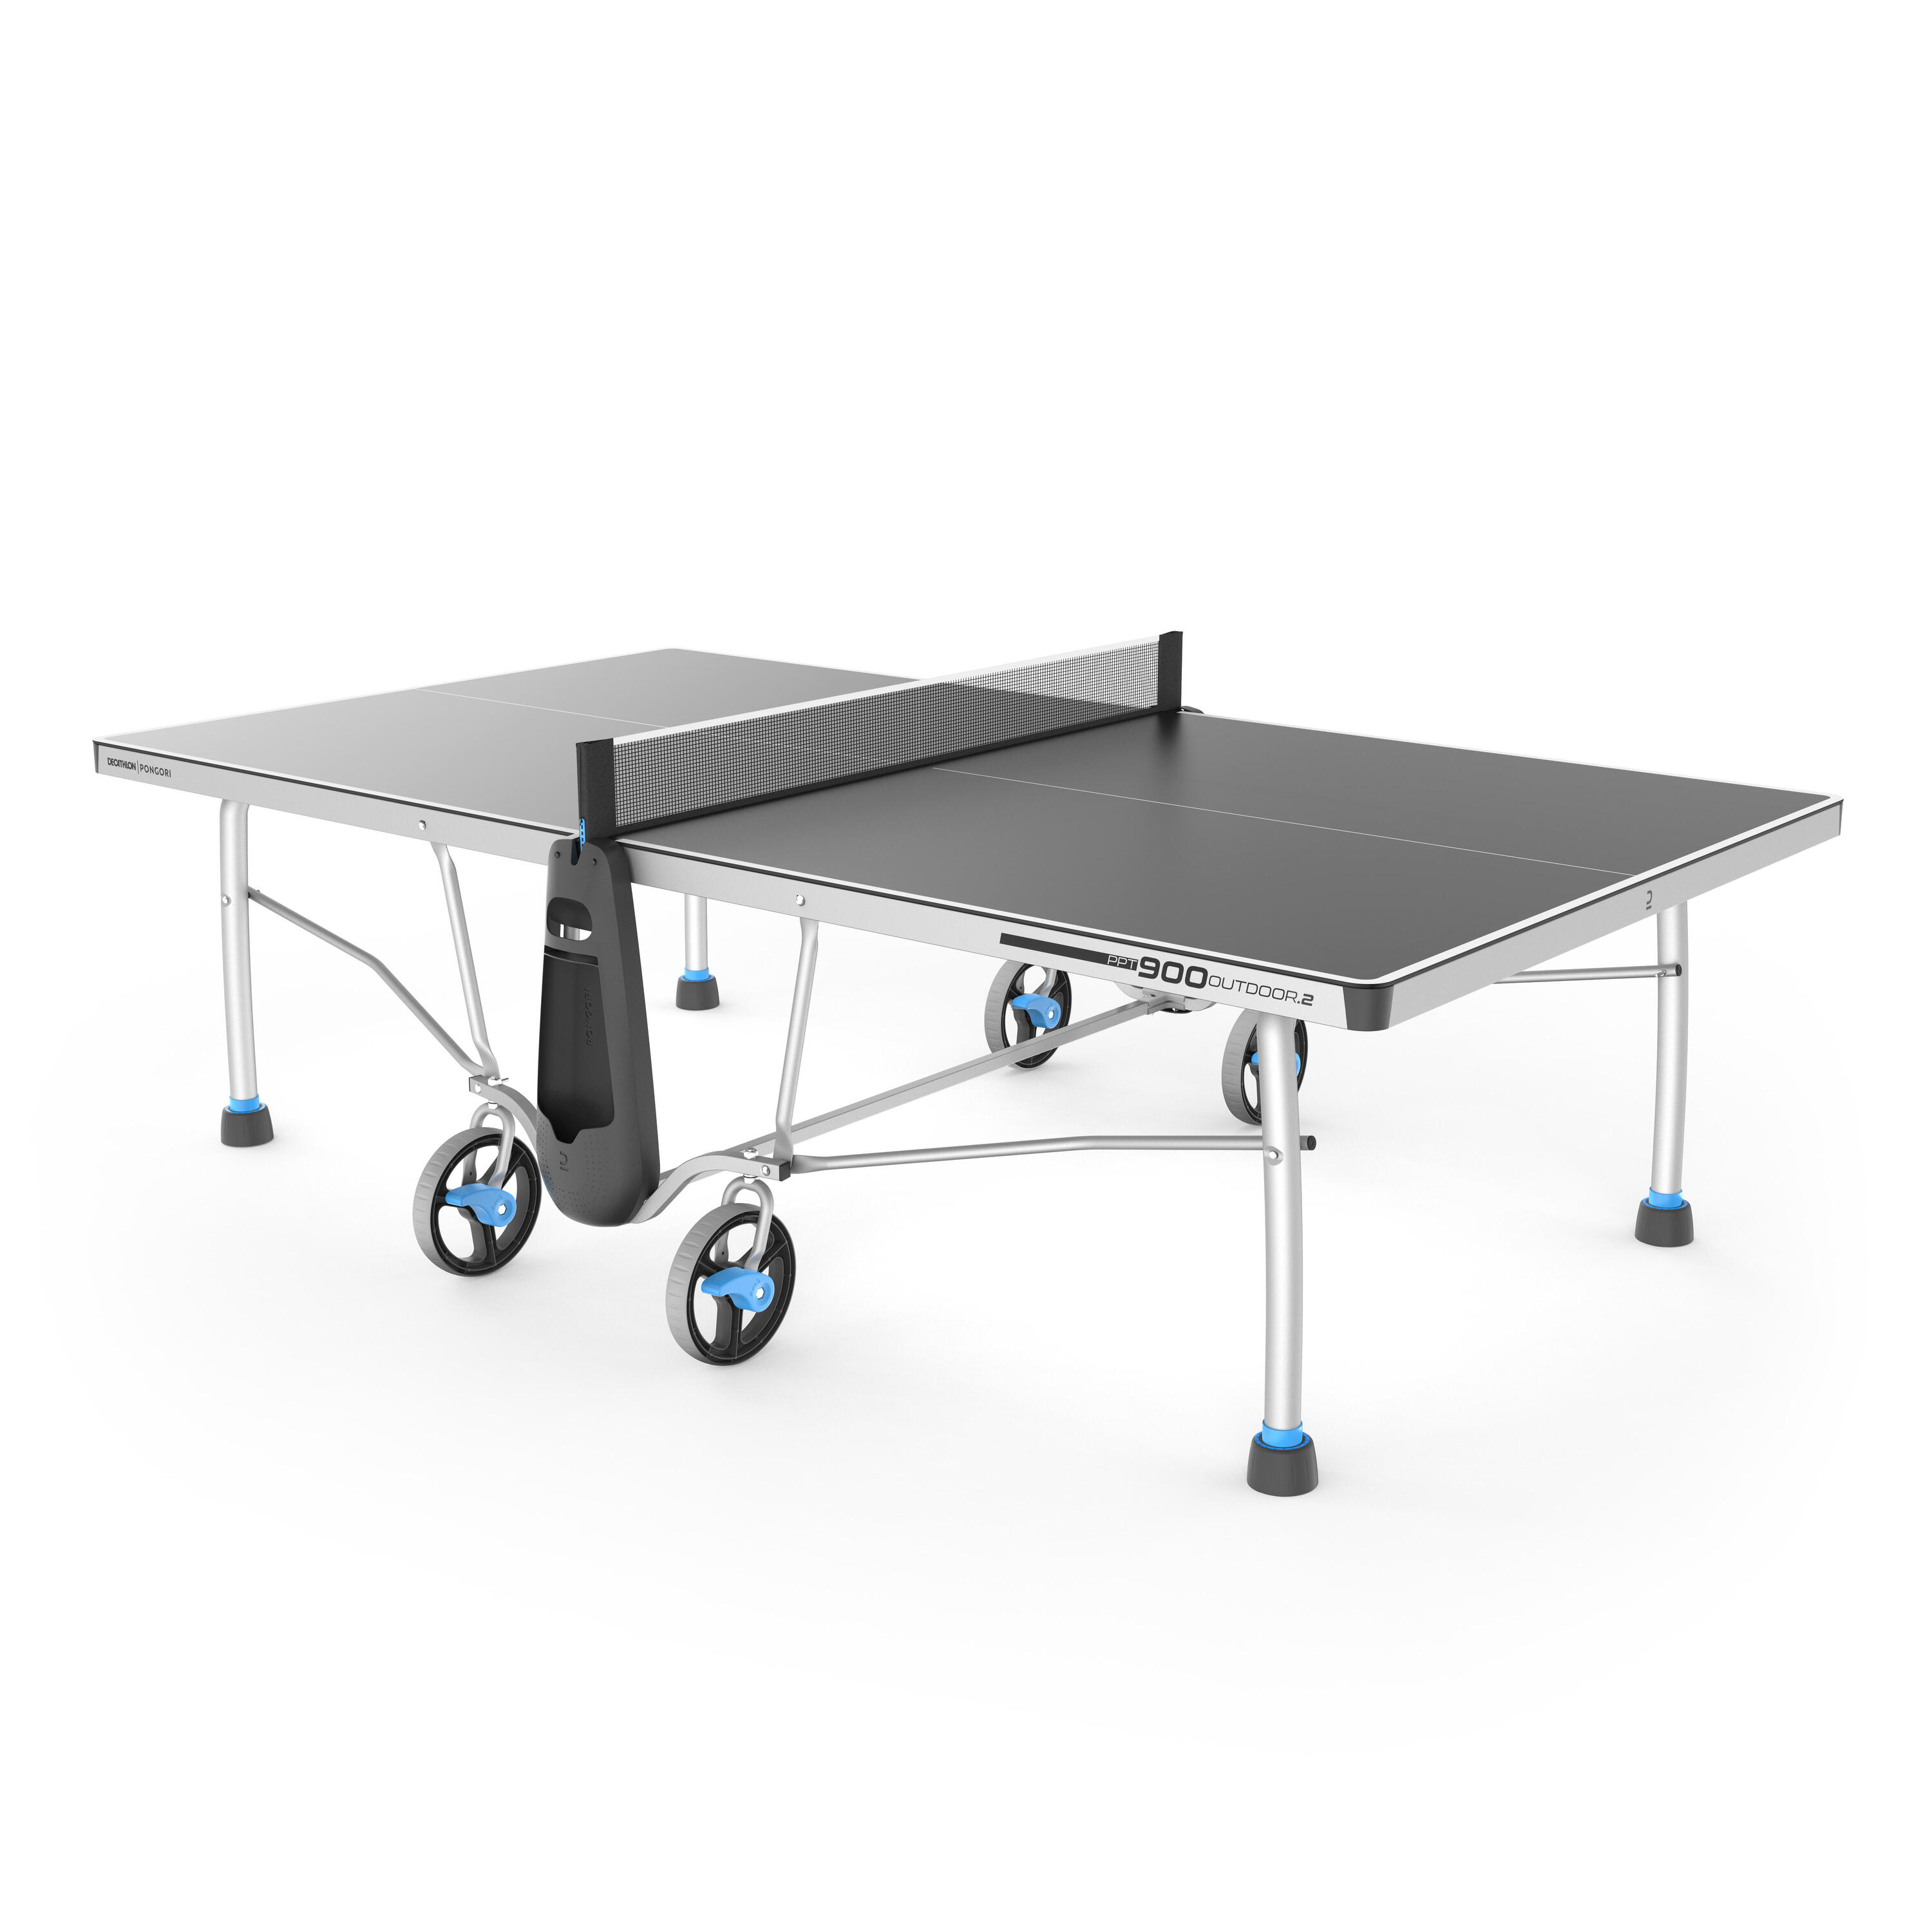 Outdoor Table Tennis Table PPT 900.2 - Grey 15/15